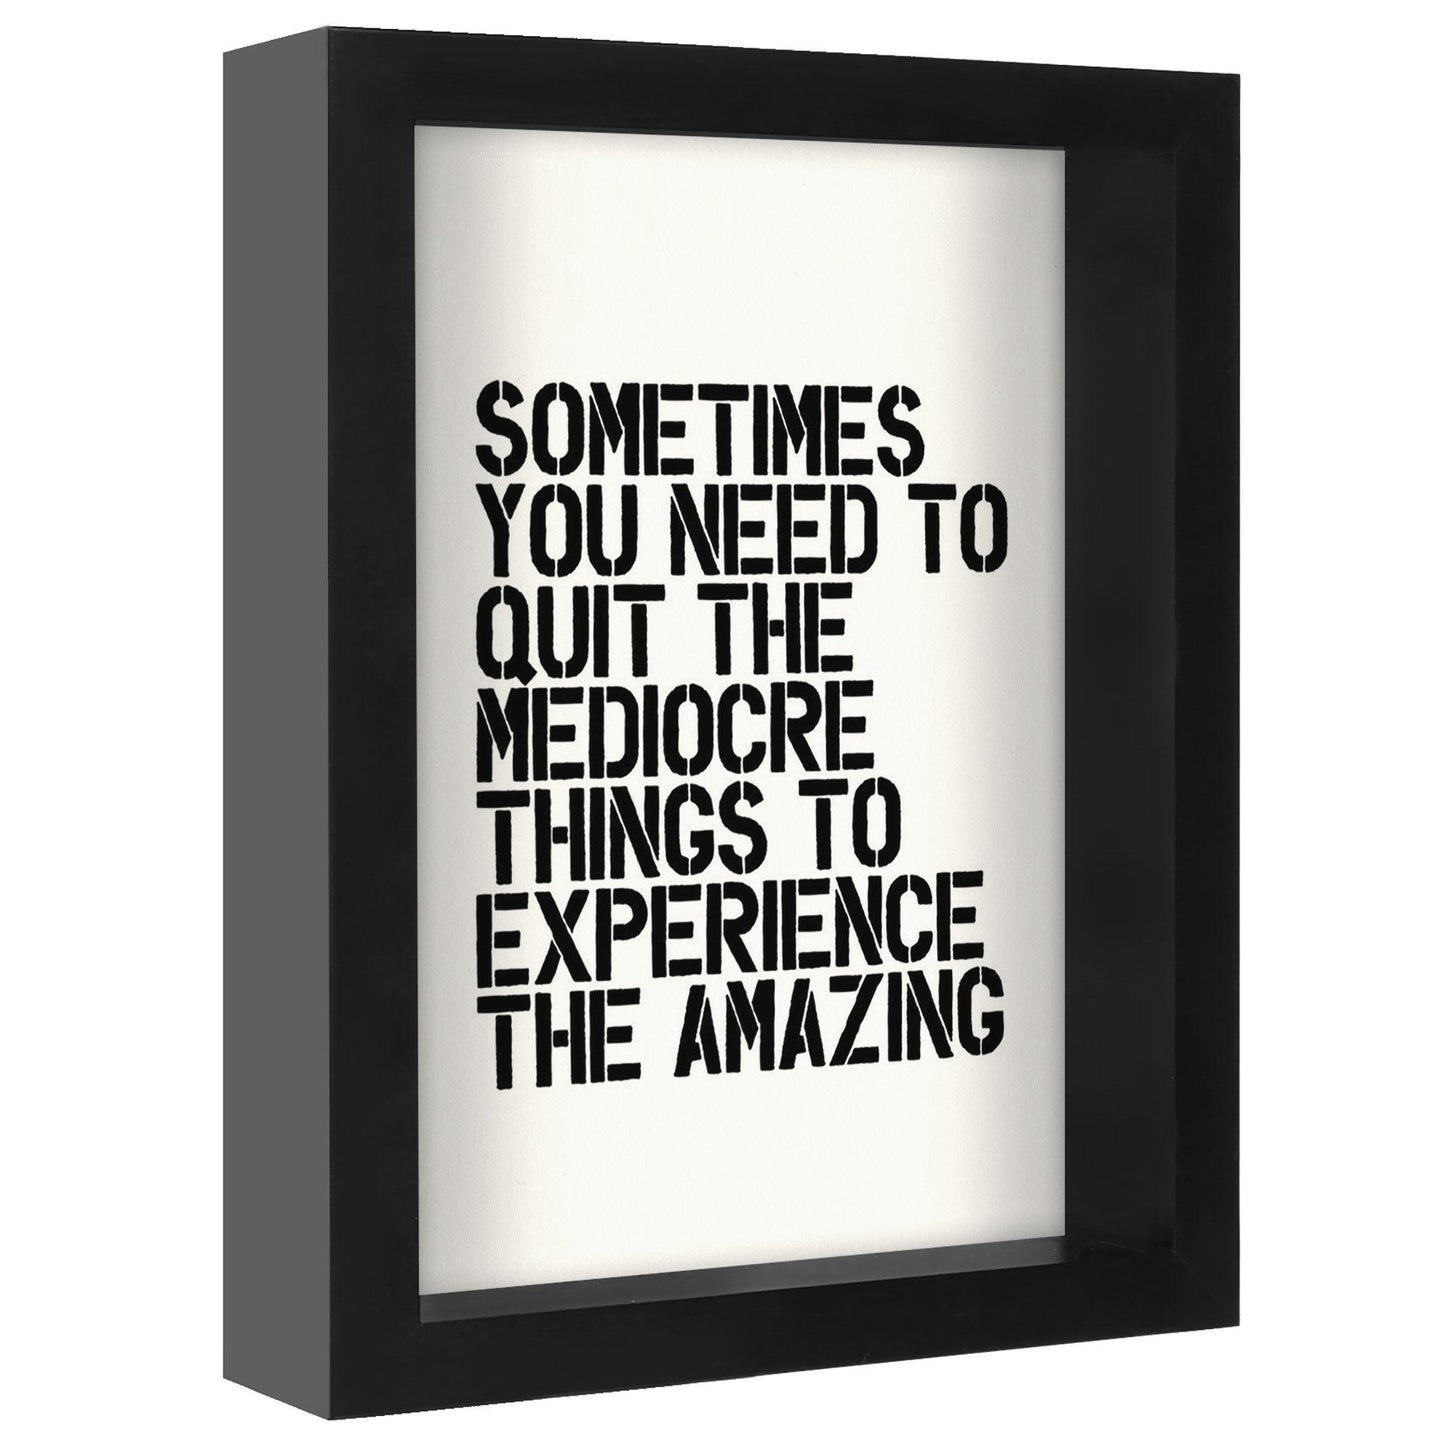 Sometimes You Need To Quit The Mediocre By Motivated Type - Shadow Box Framed Art - Americanflat